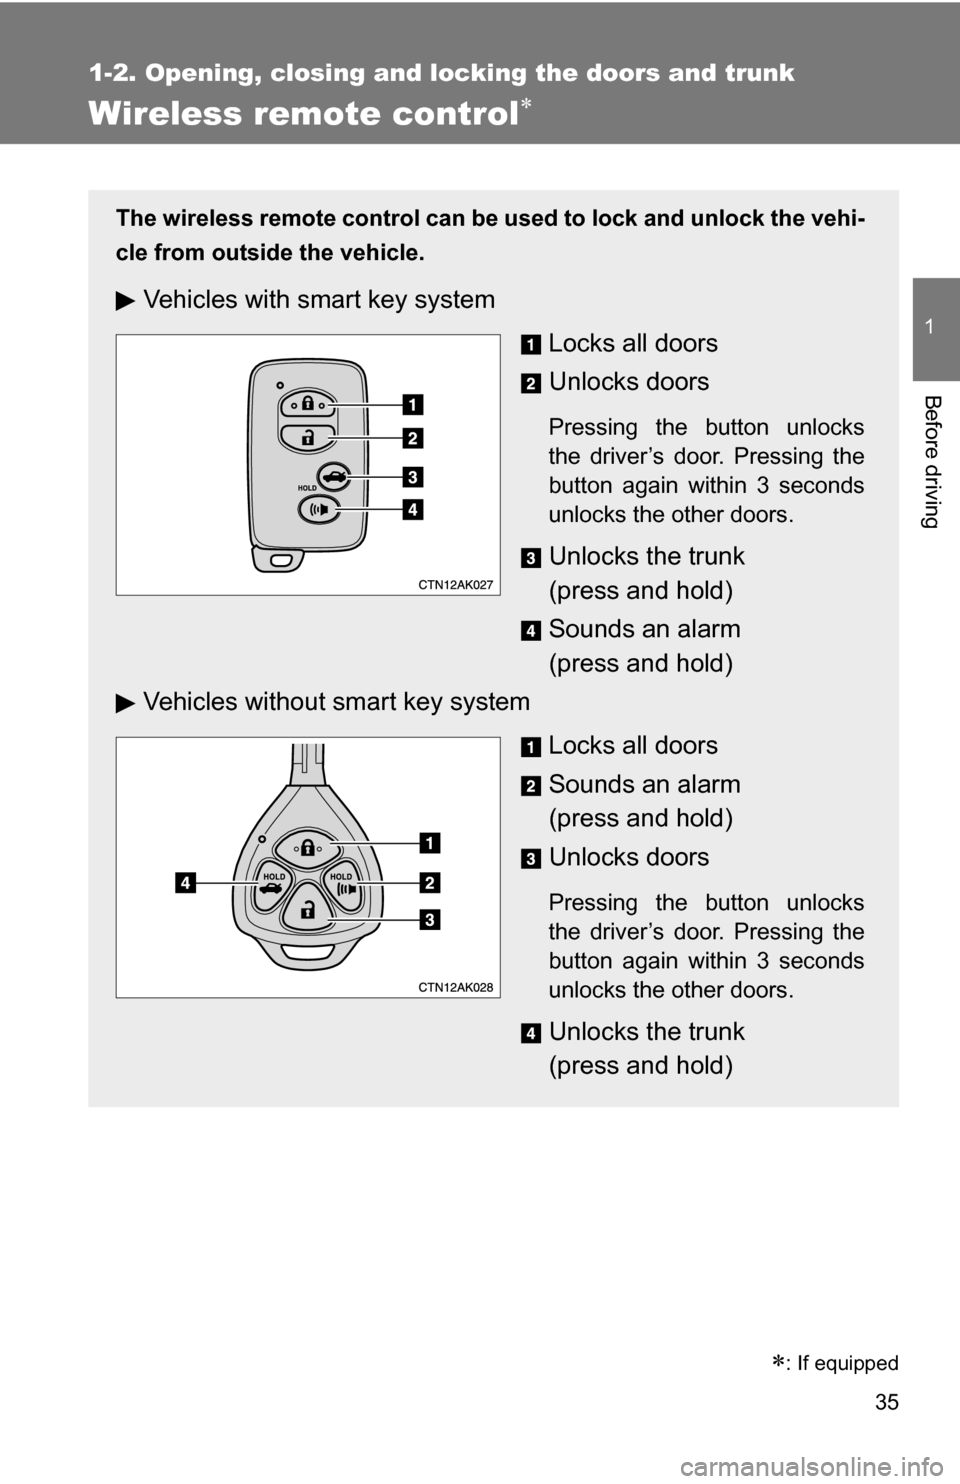 TOYOTA COROLLA 2010 10.G Owners Manual 35
1
1-2. Opening, closing and locking the doors and trunk
Before driving
Wireless remote control
The wireless remote control can be used to lock and unlock the vehi-
cle from outside the vehicle.
